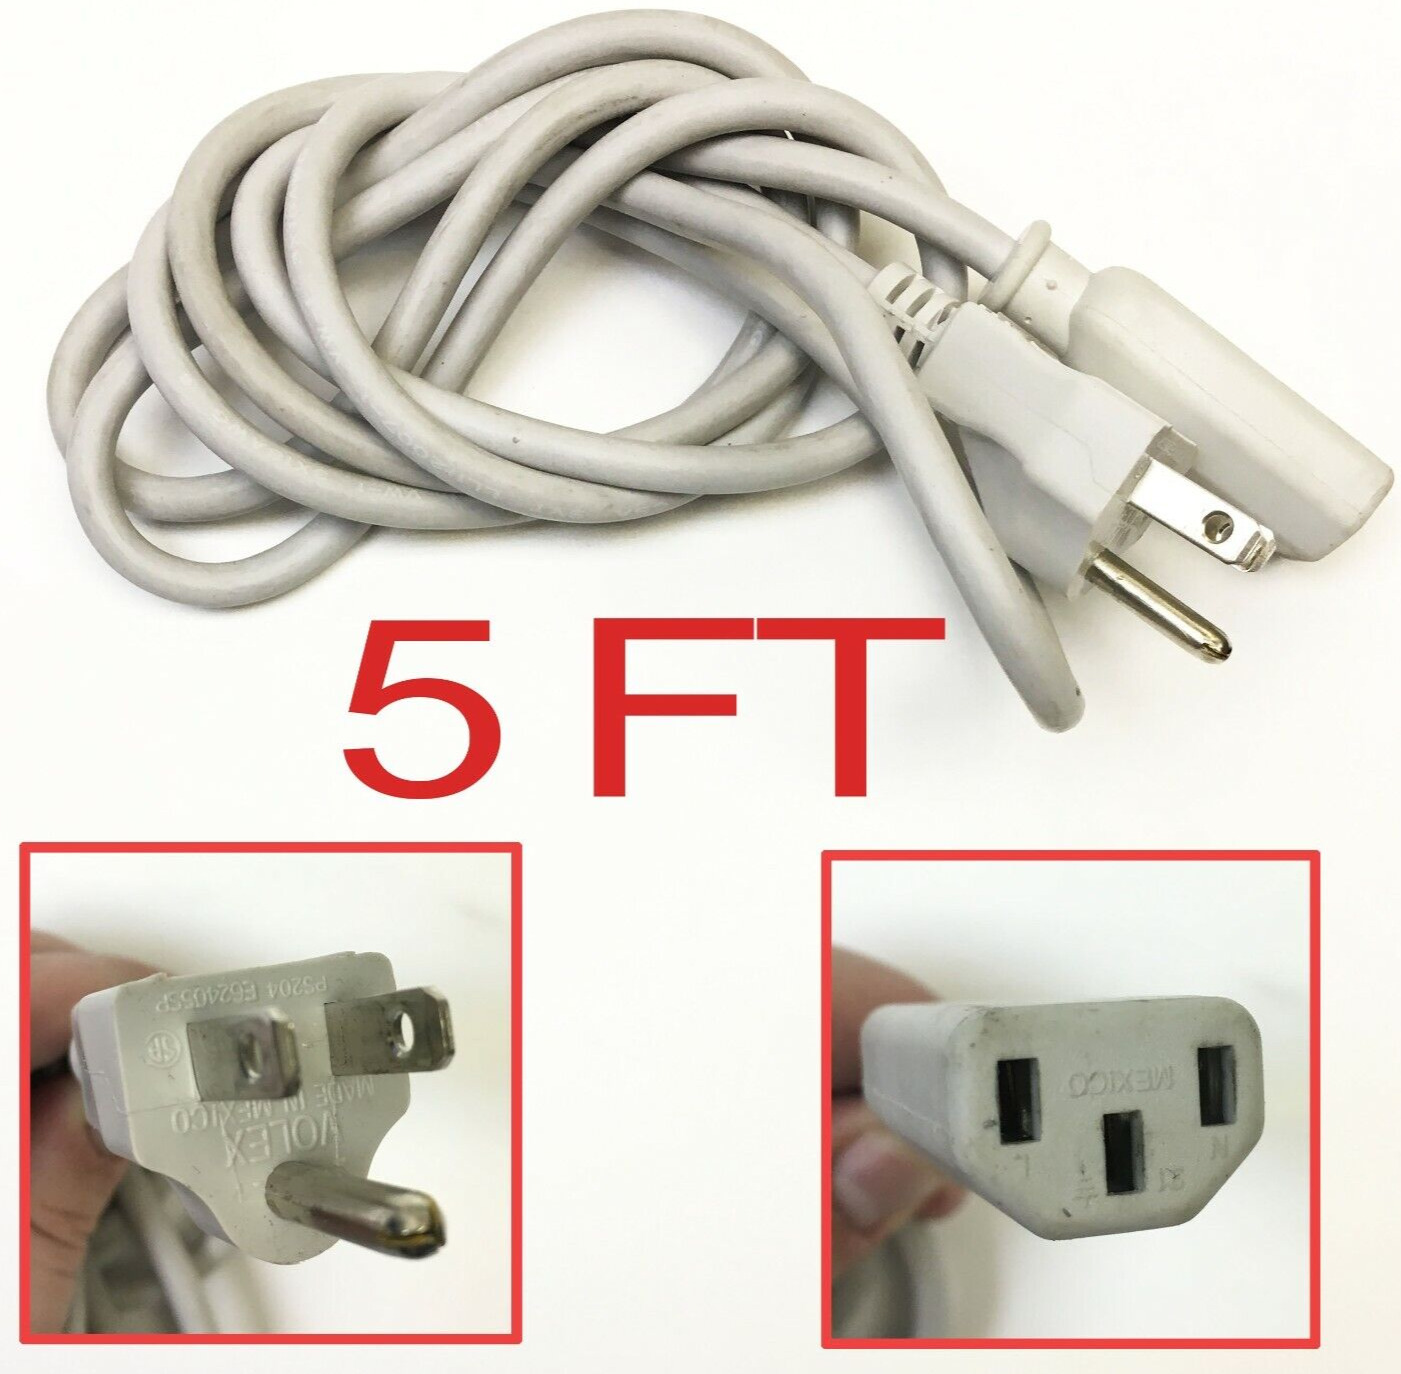 5\' Foot Volex E62405SP PS204 3 Prong Power Cord for Vintage Apple Mac Computers